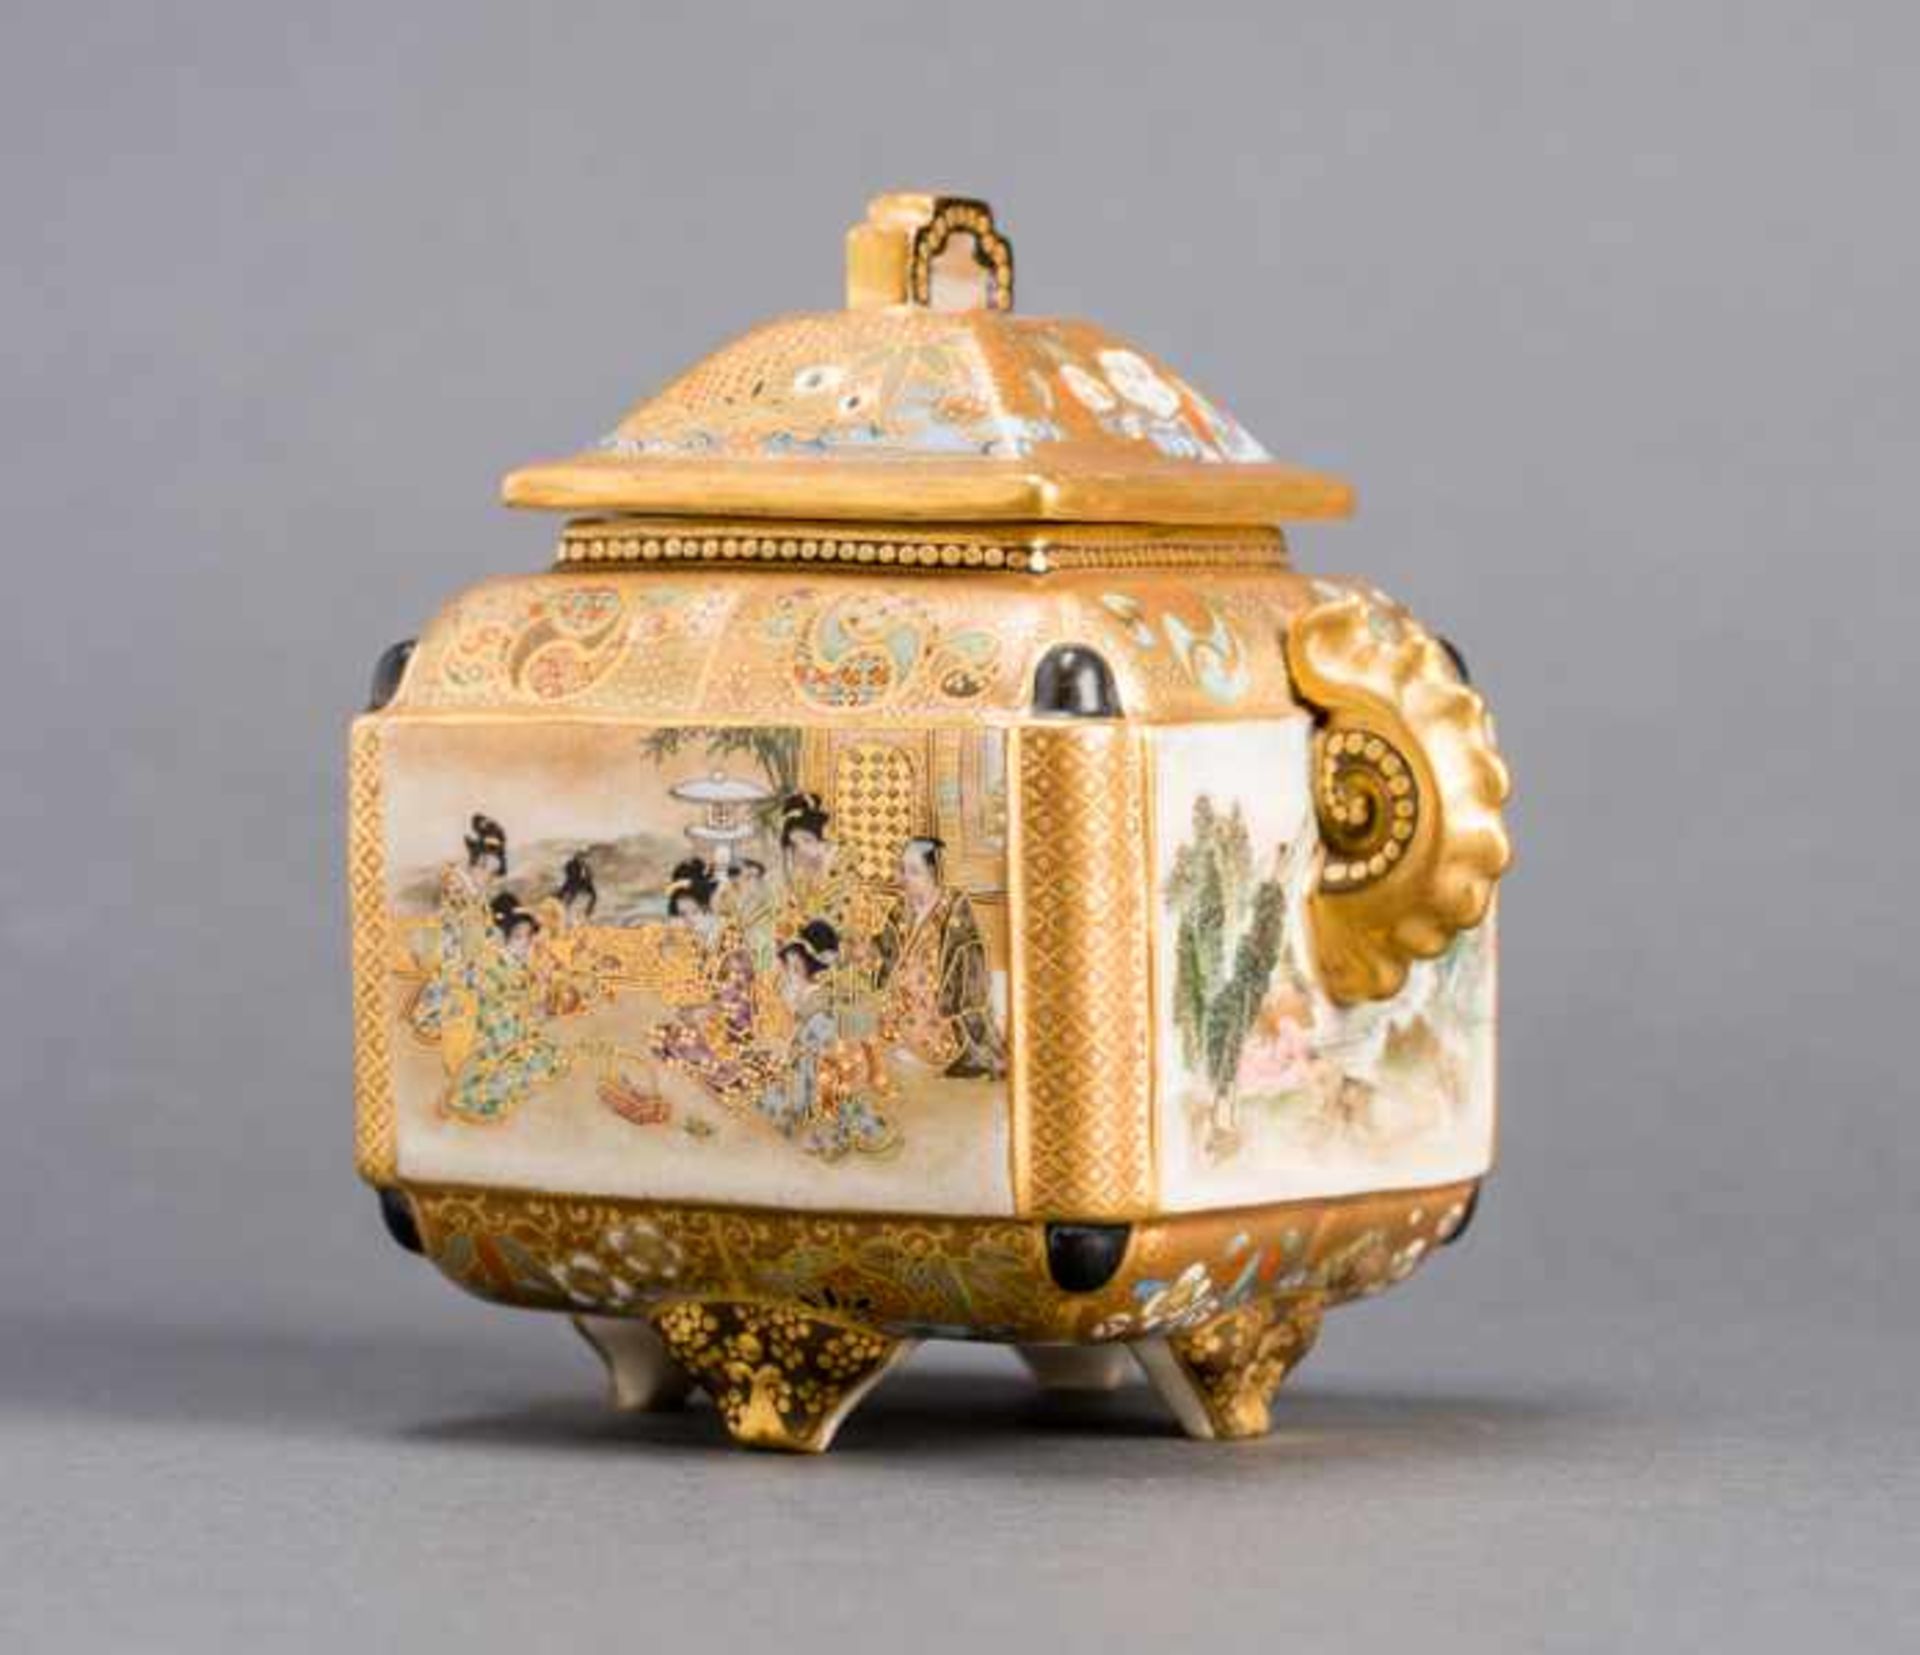 BIZAN: LANDSCAPES AND BEAUTIFUL LADIES Glazed ceramic with paint and gold. Japan, Meiji